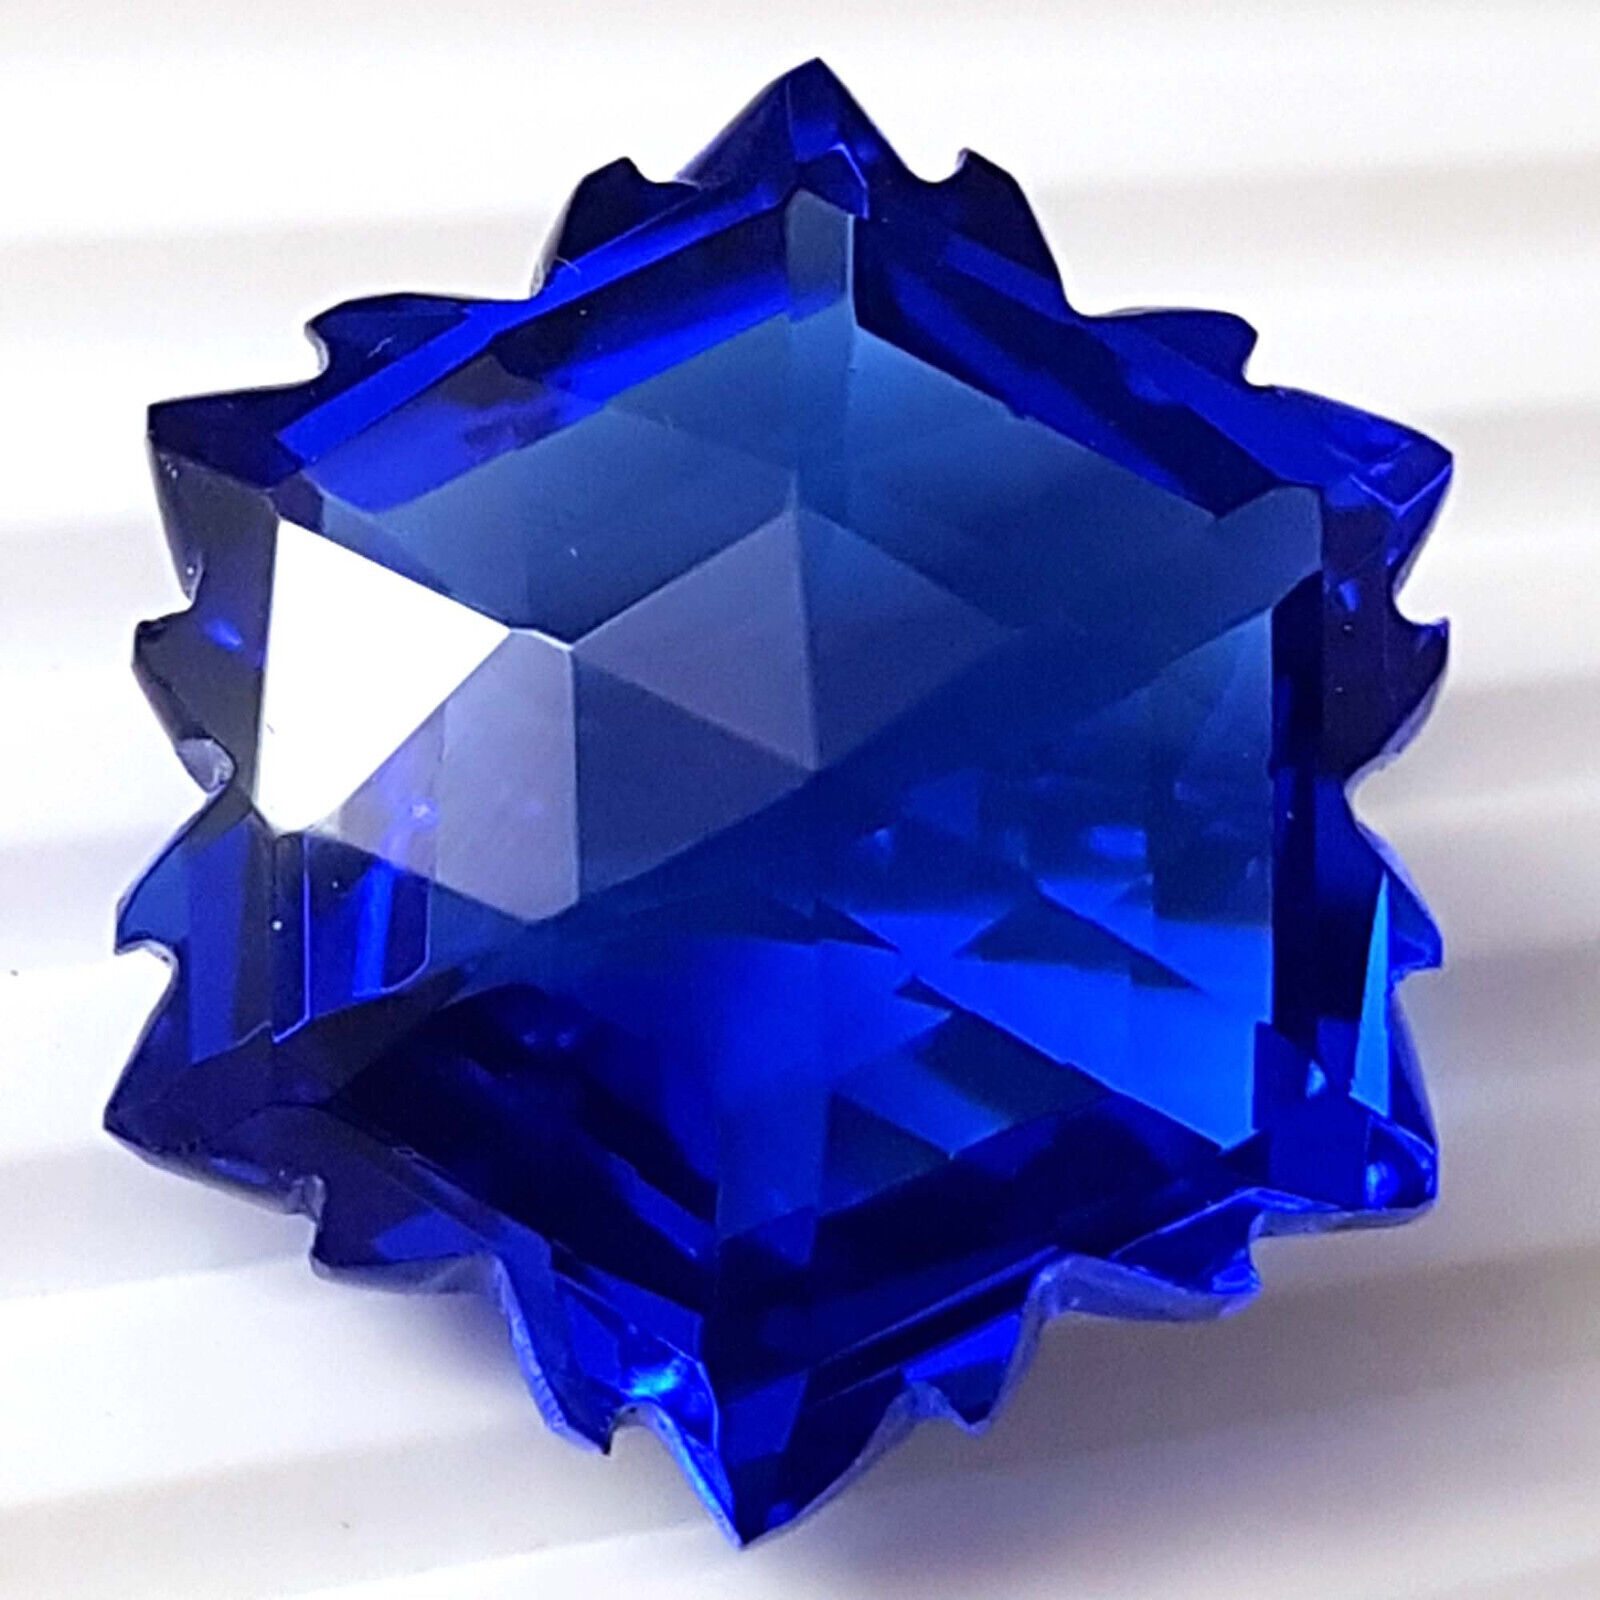 AAA Quality Extremely Rare 68 Ct Flawless Blue Sapphire Loose Gems Fancy Cut